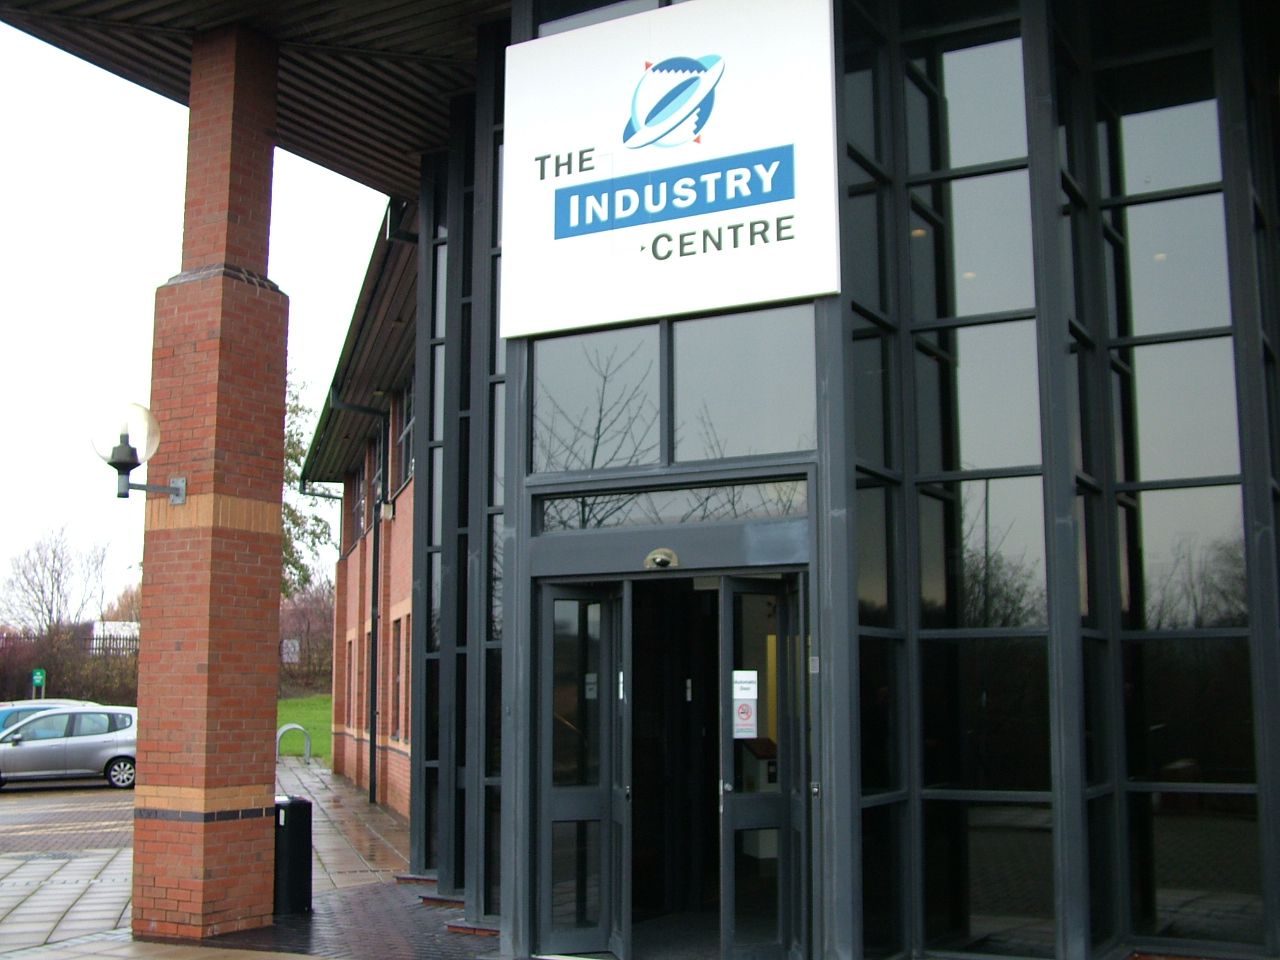 Outside of The Industry Centre